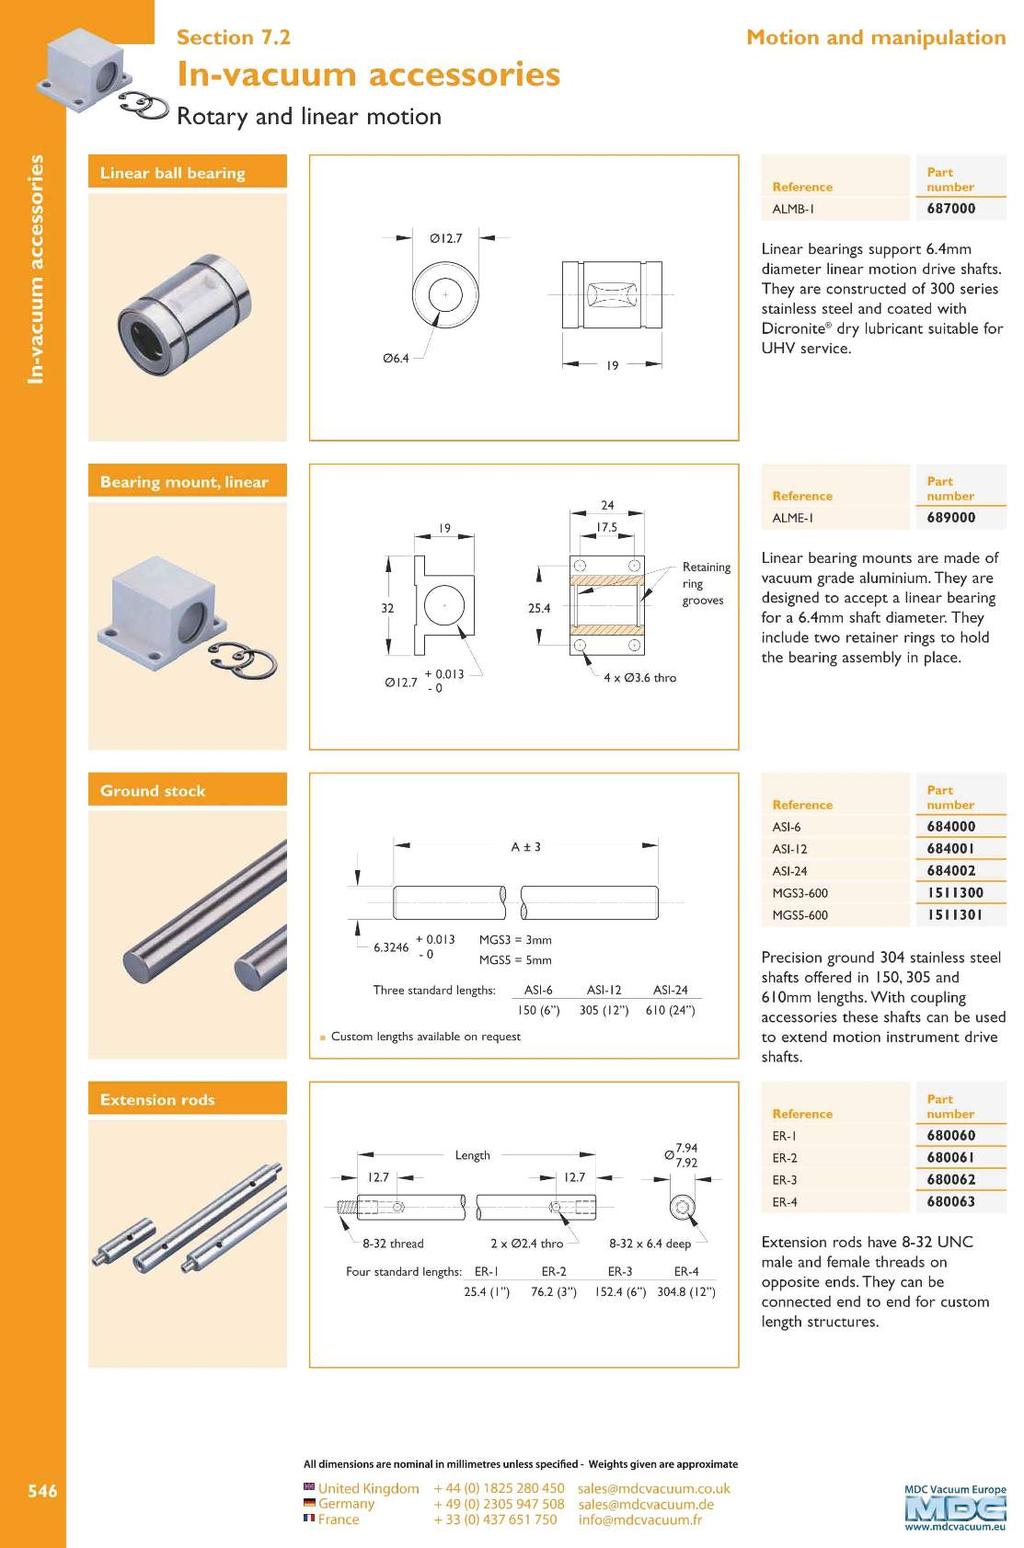 Section 7.2 n-vacuum accessories ~ Rotary and linear motion Linear ball bearing - ~~~ 06.4 J L \SJS 19 _J ALMB-1 687000 Linear bearings support 6.4mm diameter linear motion drive shafts.